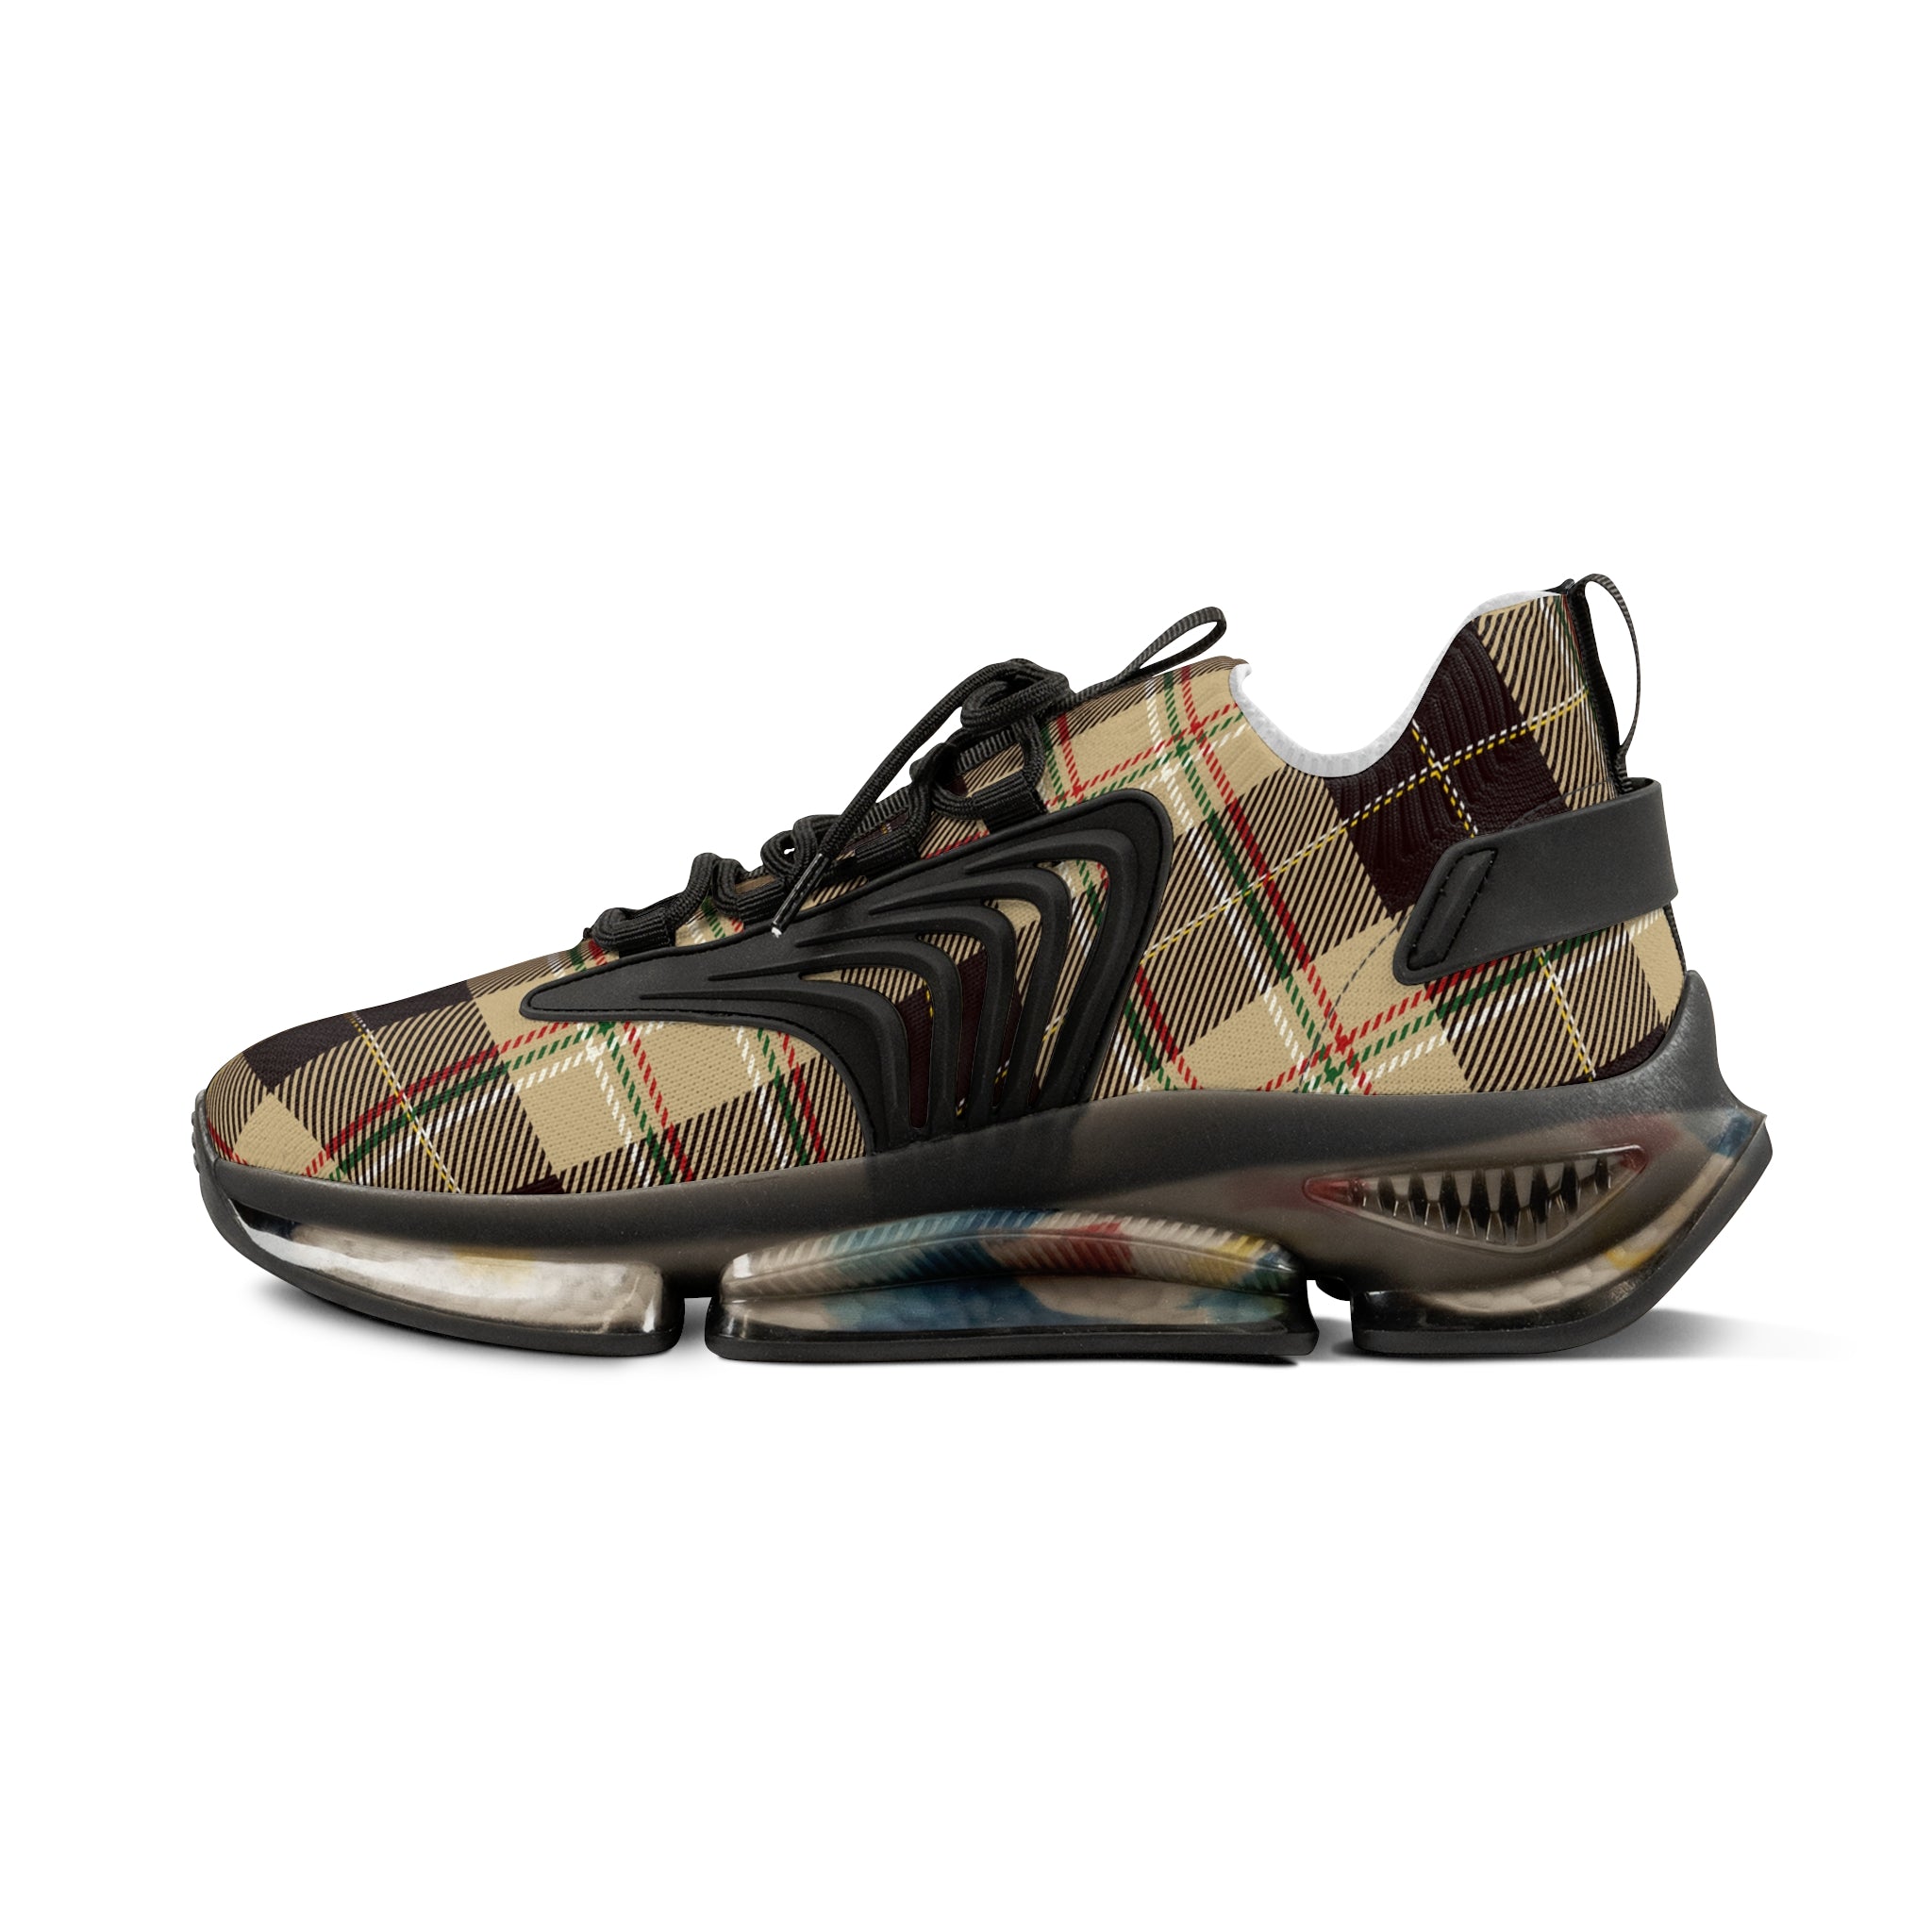  Groove Collection Dark Brown Plaid Men's Mesh Sneakers with Black or White Sole Shoes